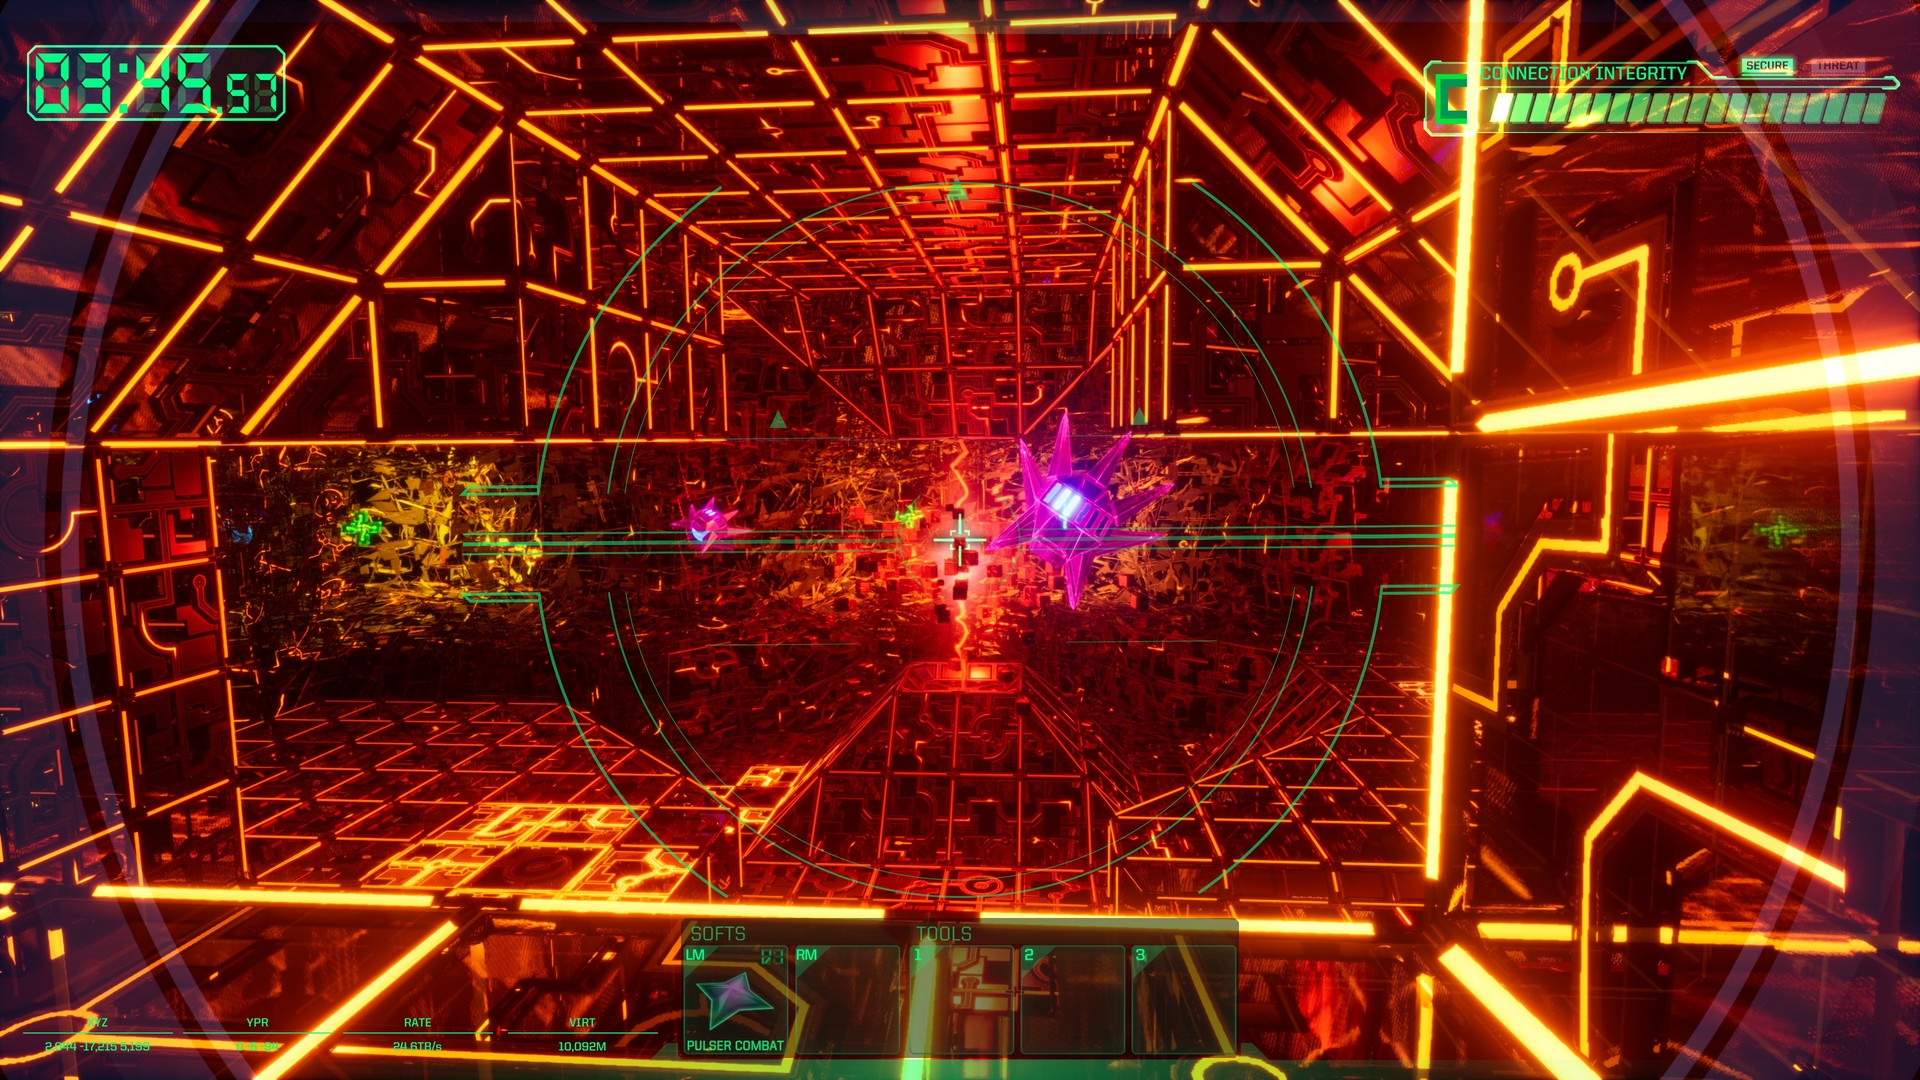 Prime Matter Will Publish the System Shock Remake